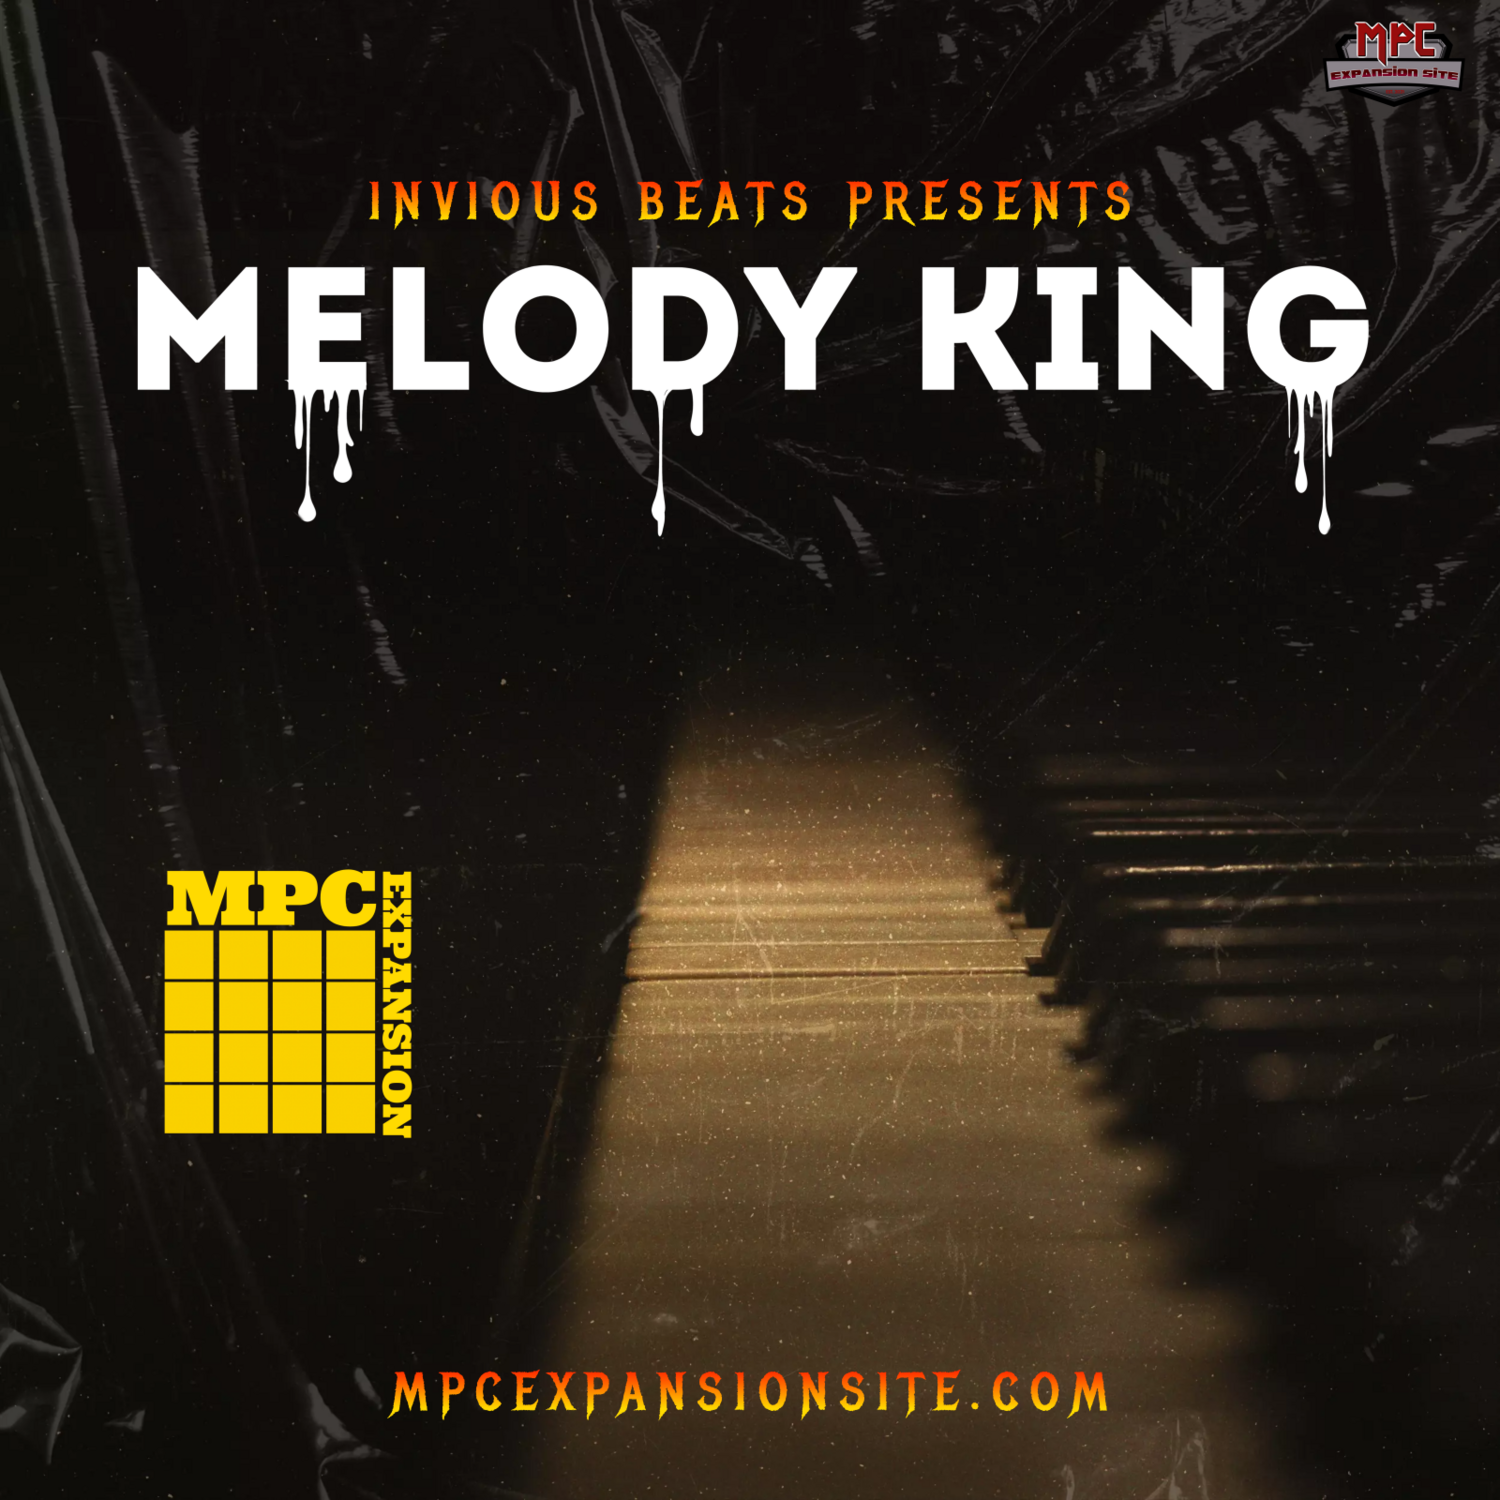 MPC EXPANSION 'MELODY KING' by INVIOUS